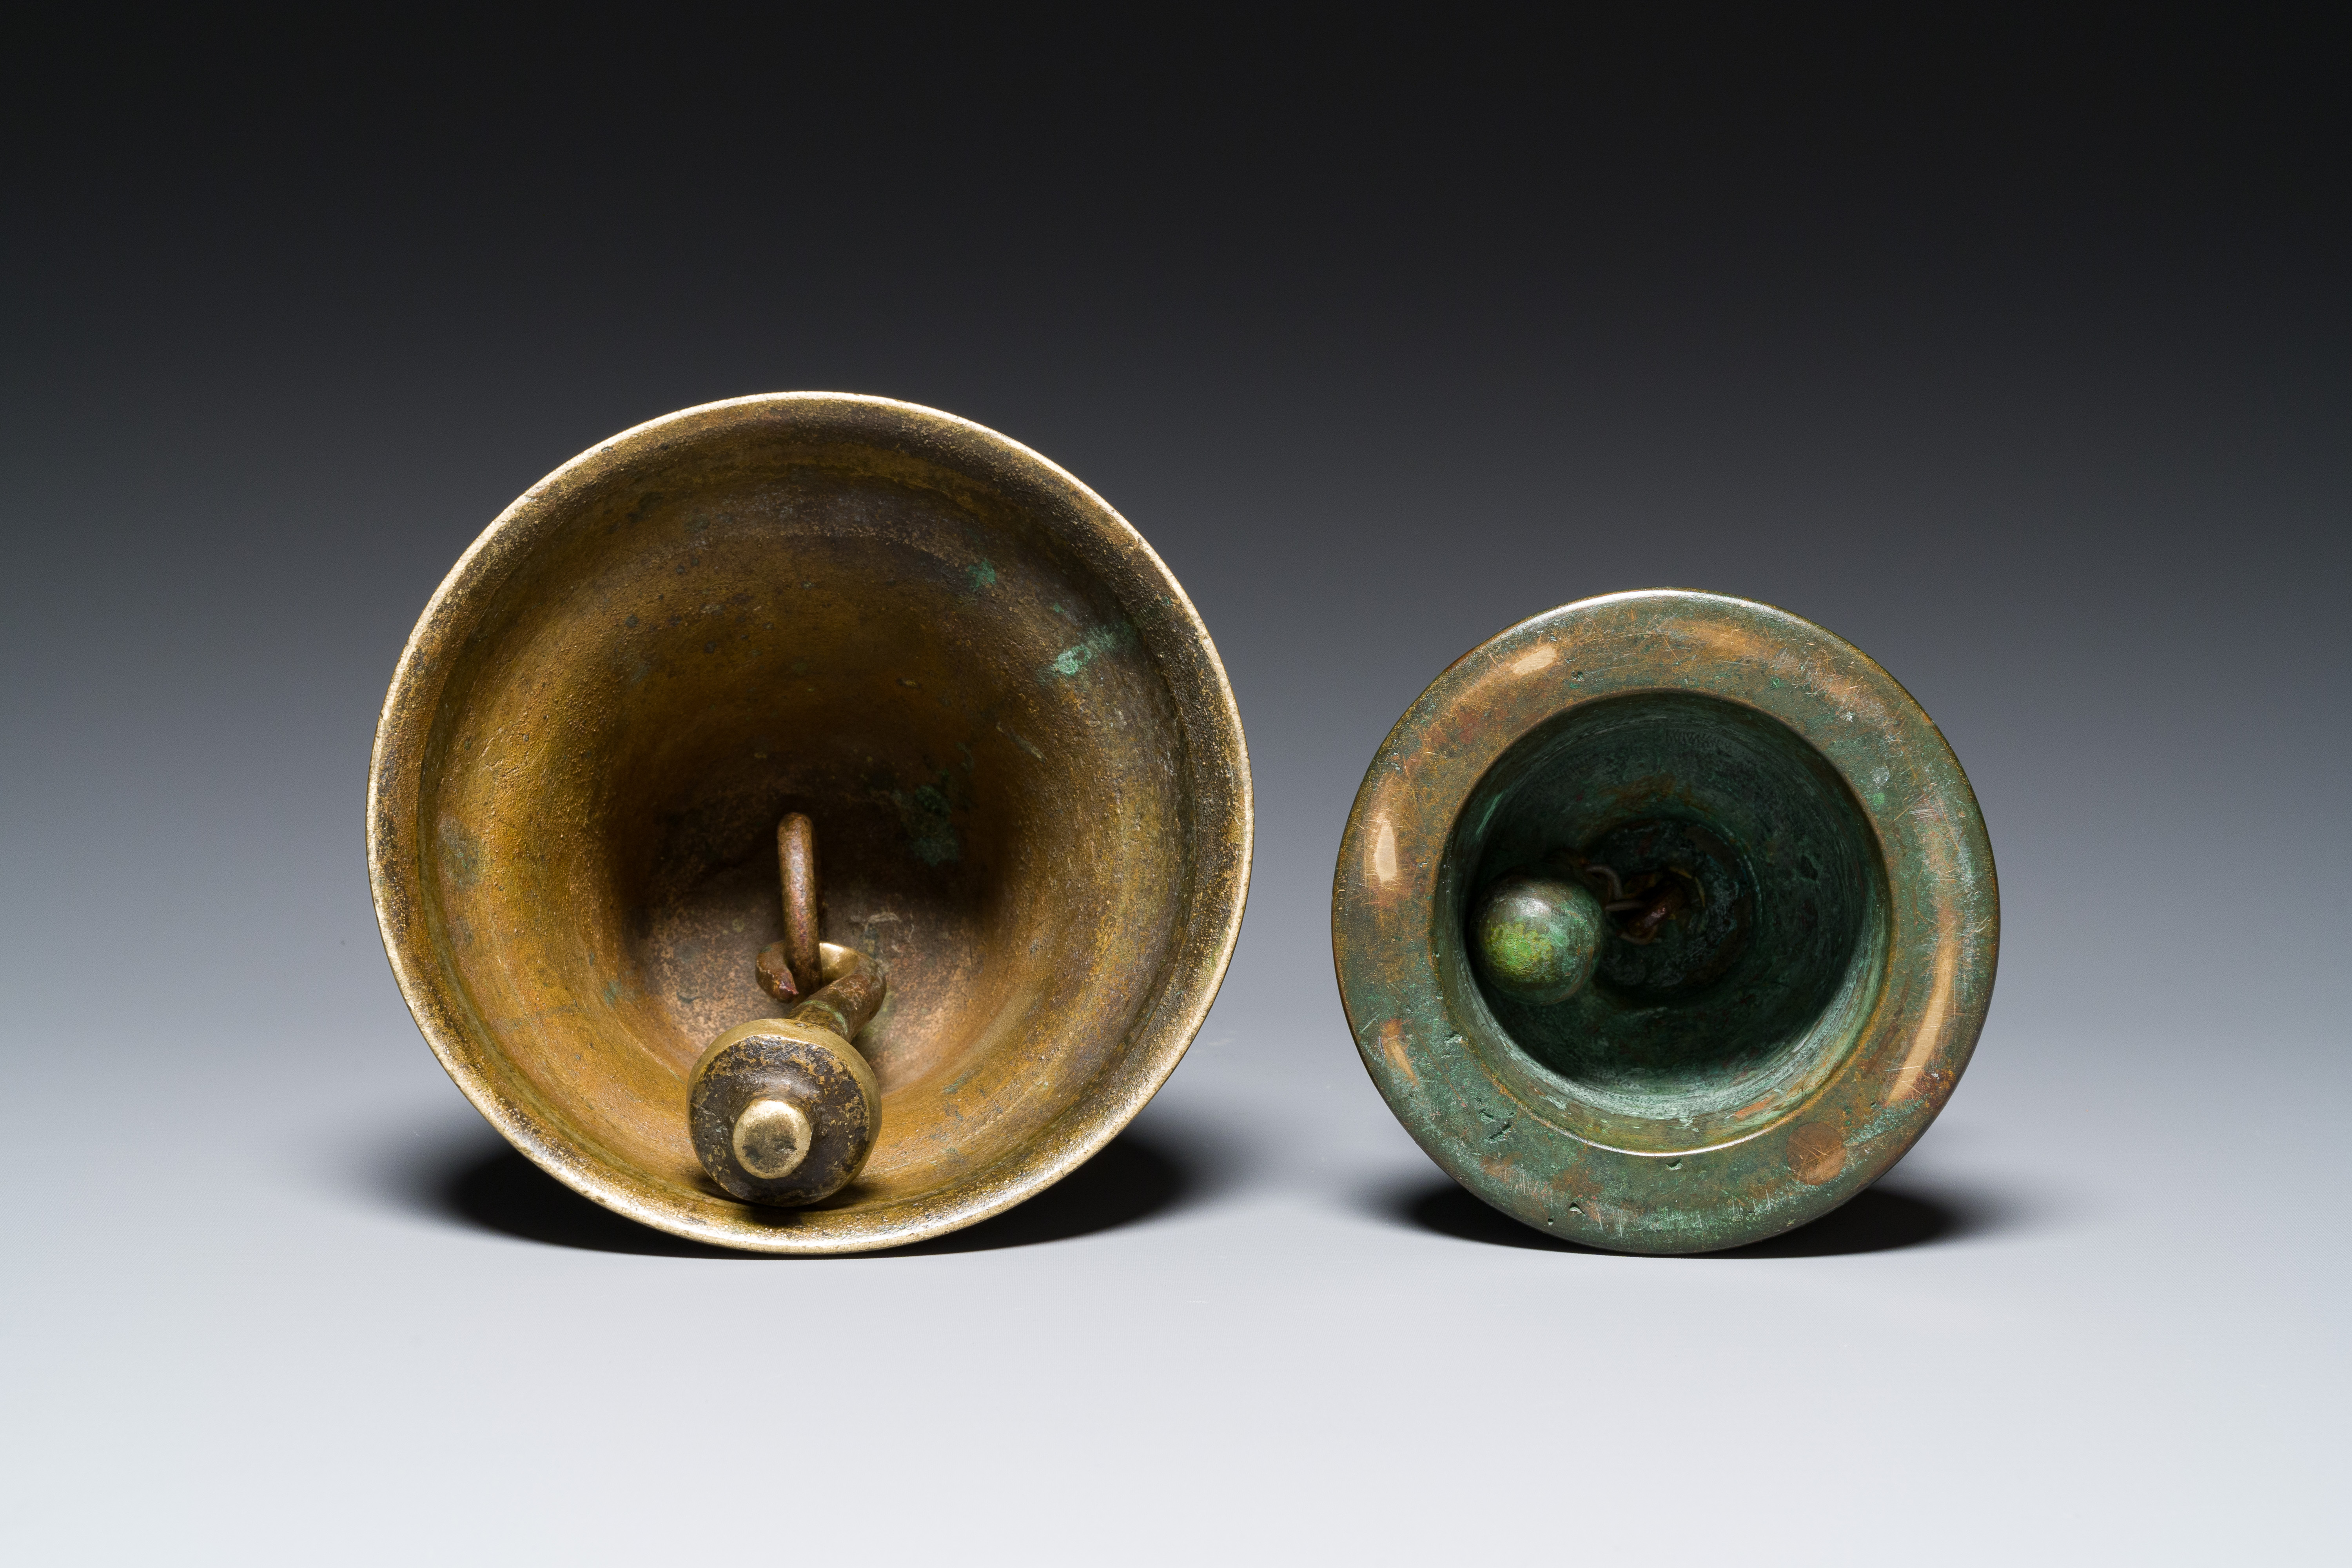 A bronze bell and a ceremonial hand bell, South Asia and Southeast Asia, 19th C. or earlier - Image 21 of 21